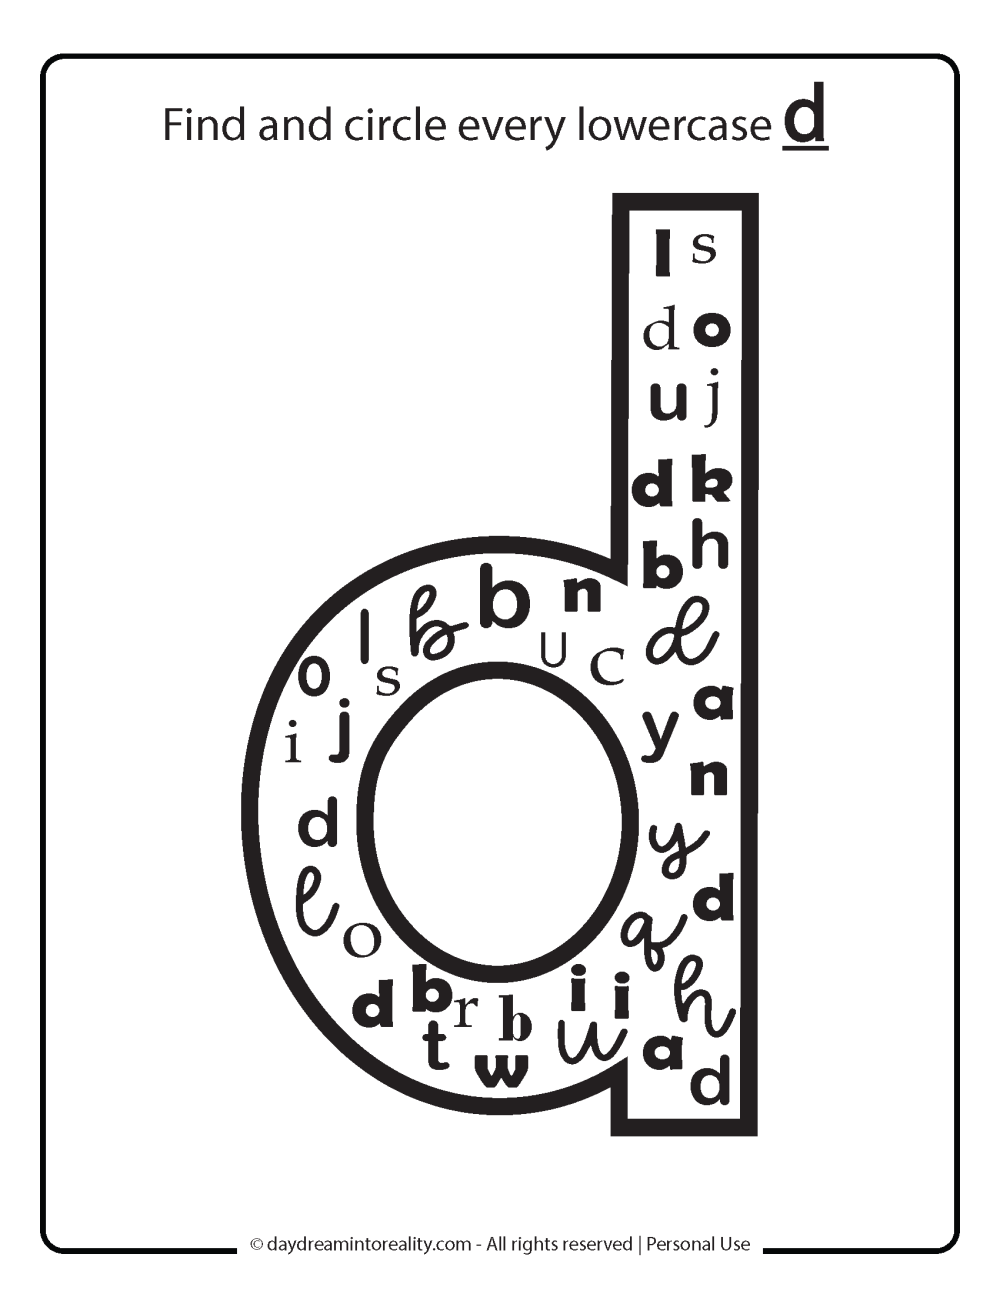 Letter D worksheet free printables - find and circle all lowercase d